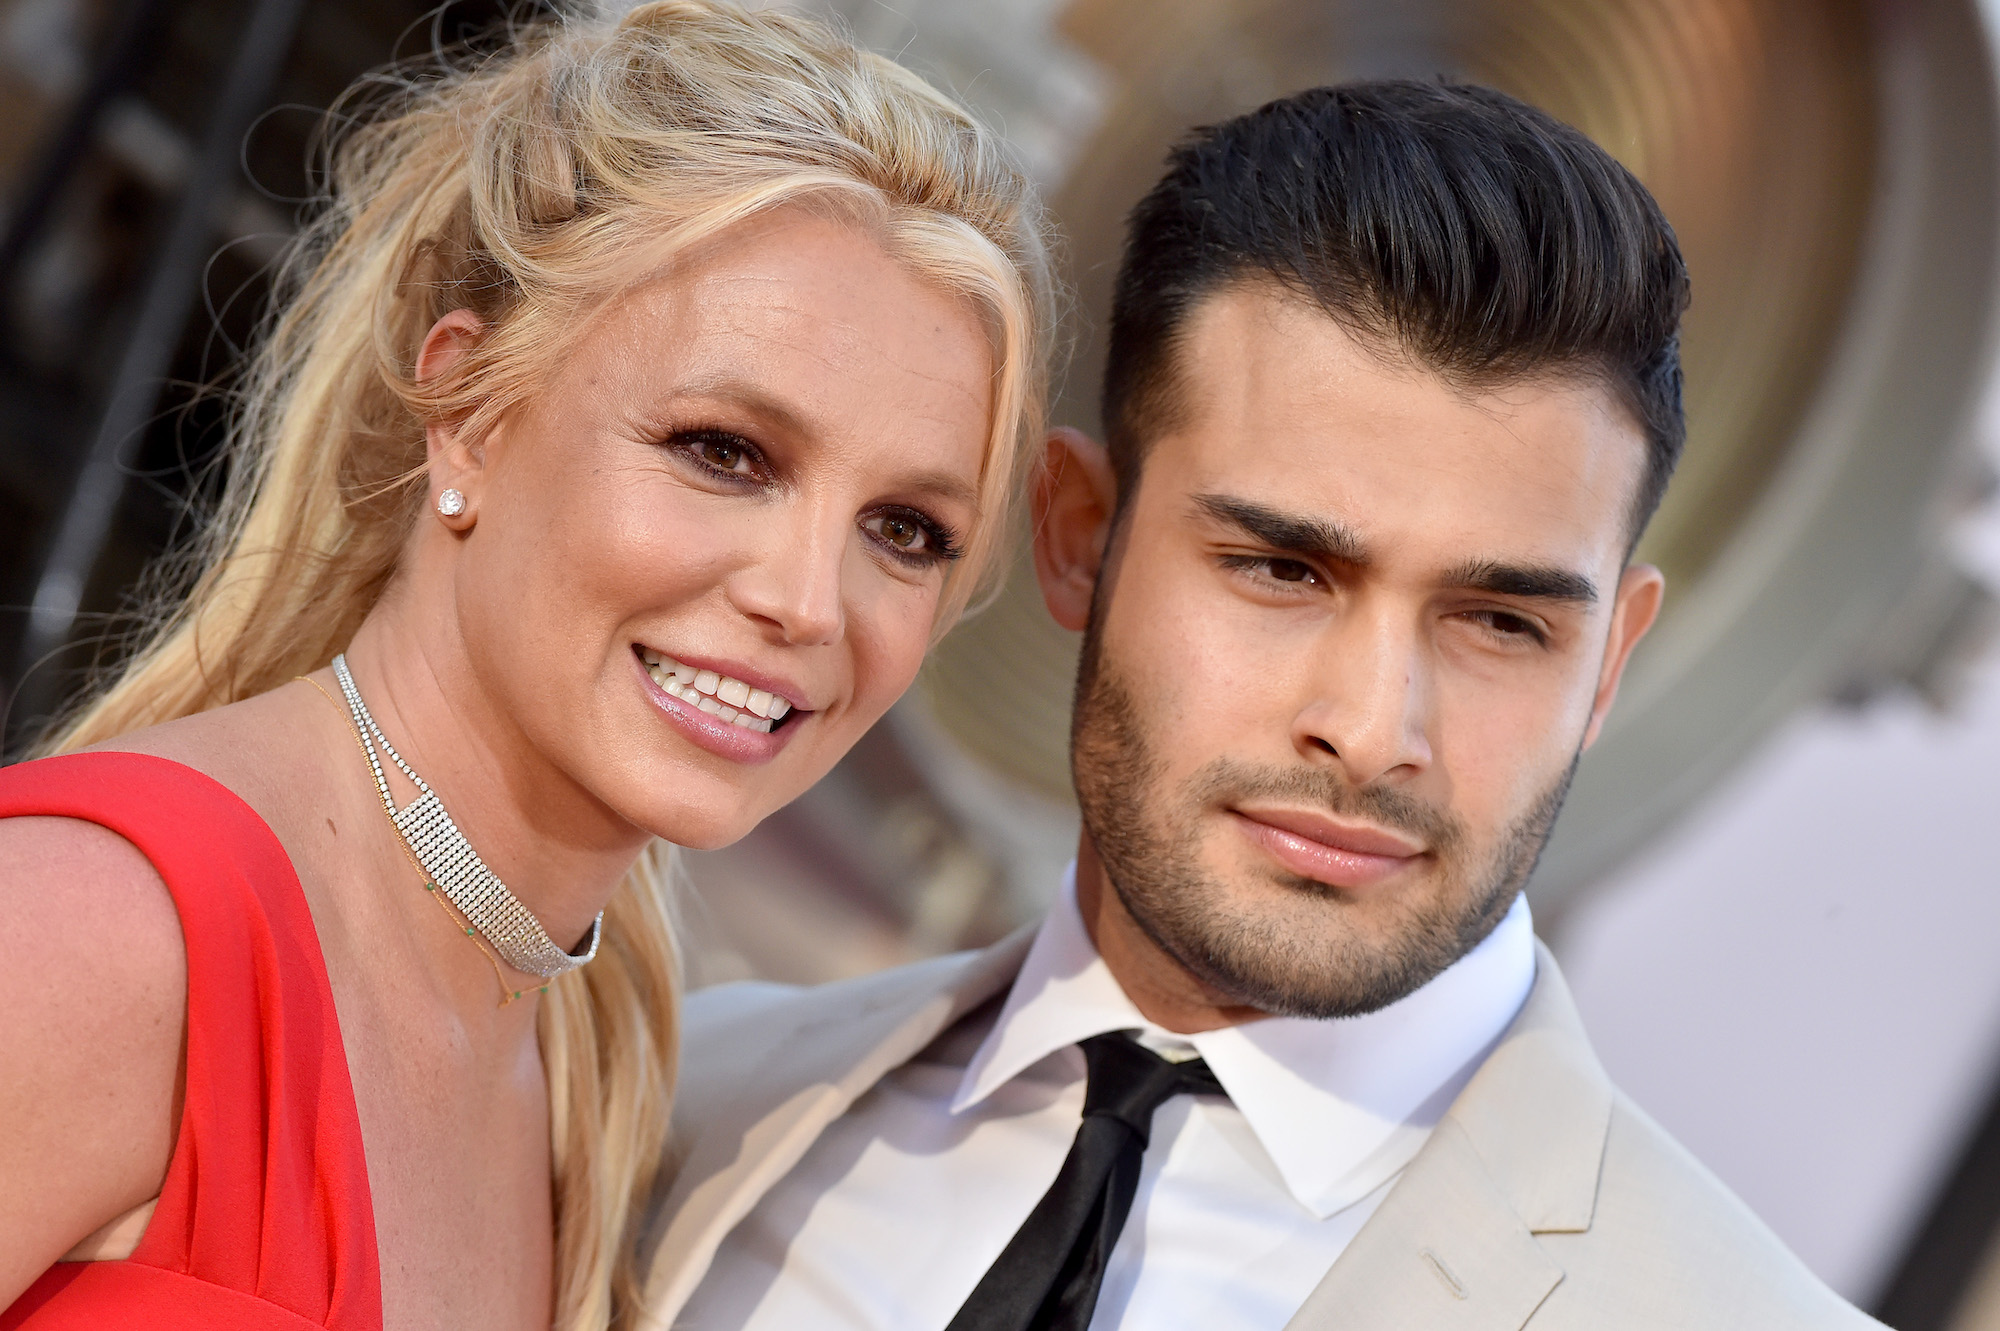 Britney Spears and Sam Asghari attending the premiere of "Once Upon A Time...In Hollywood"